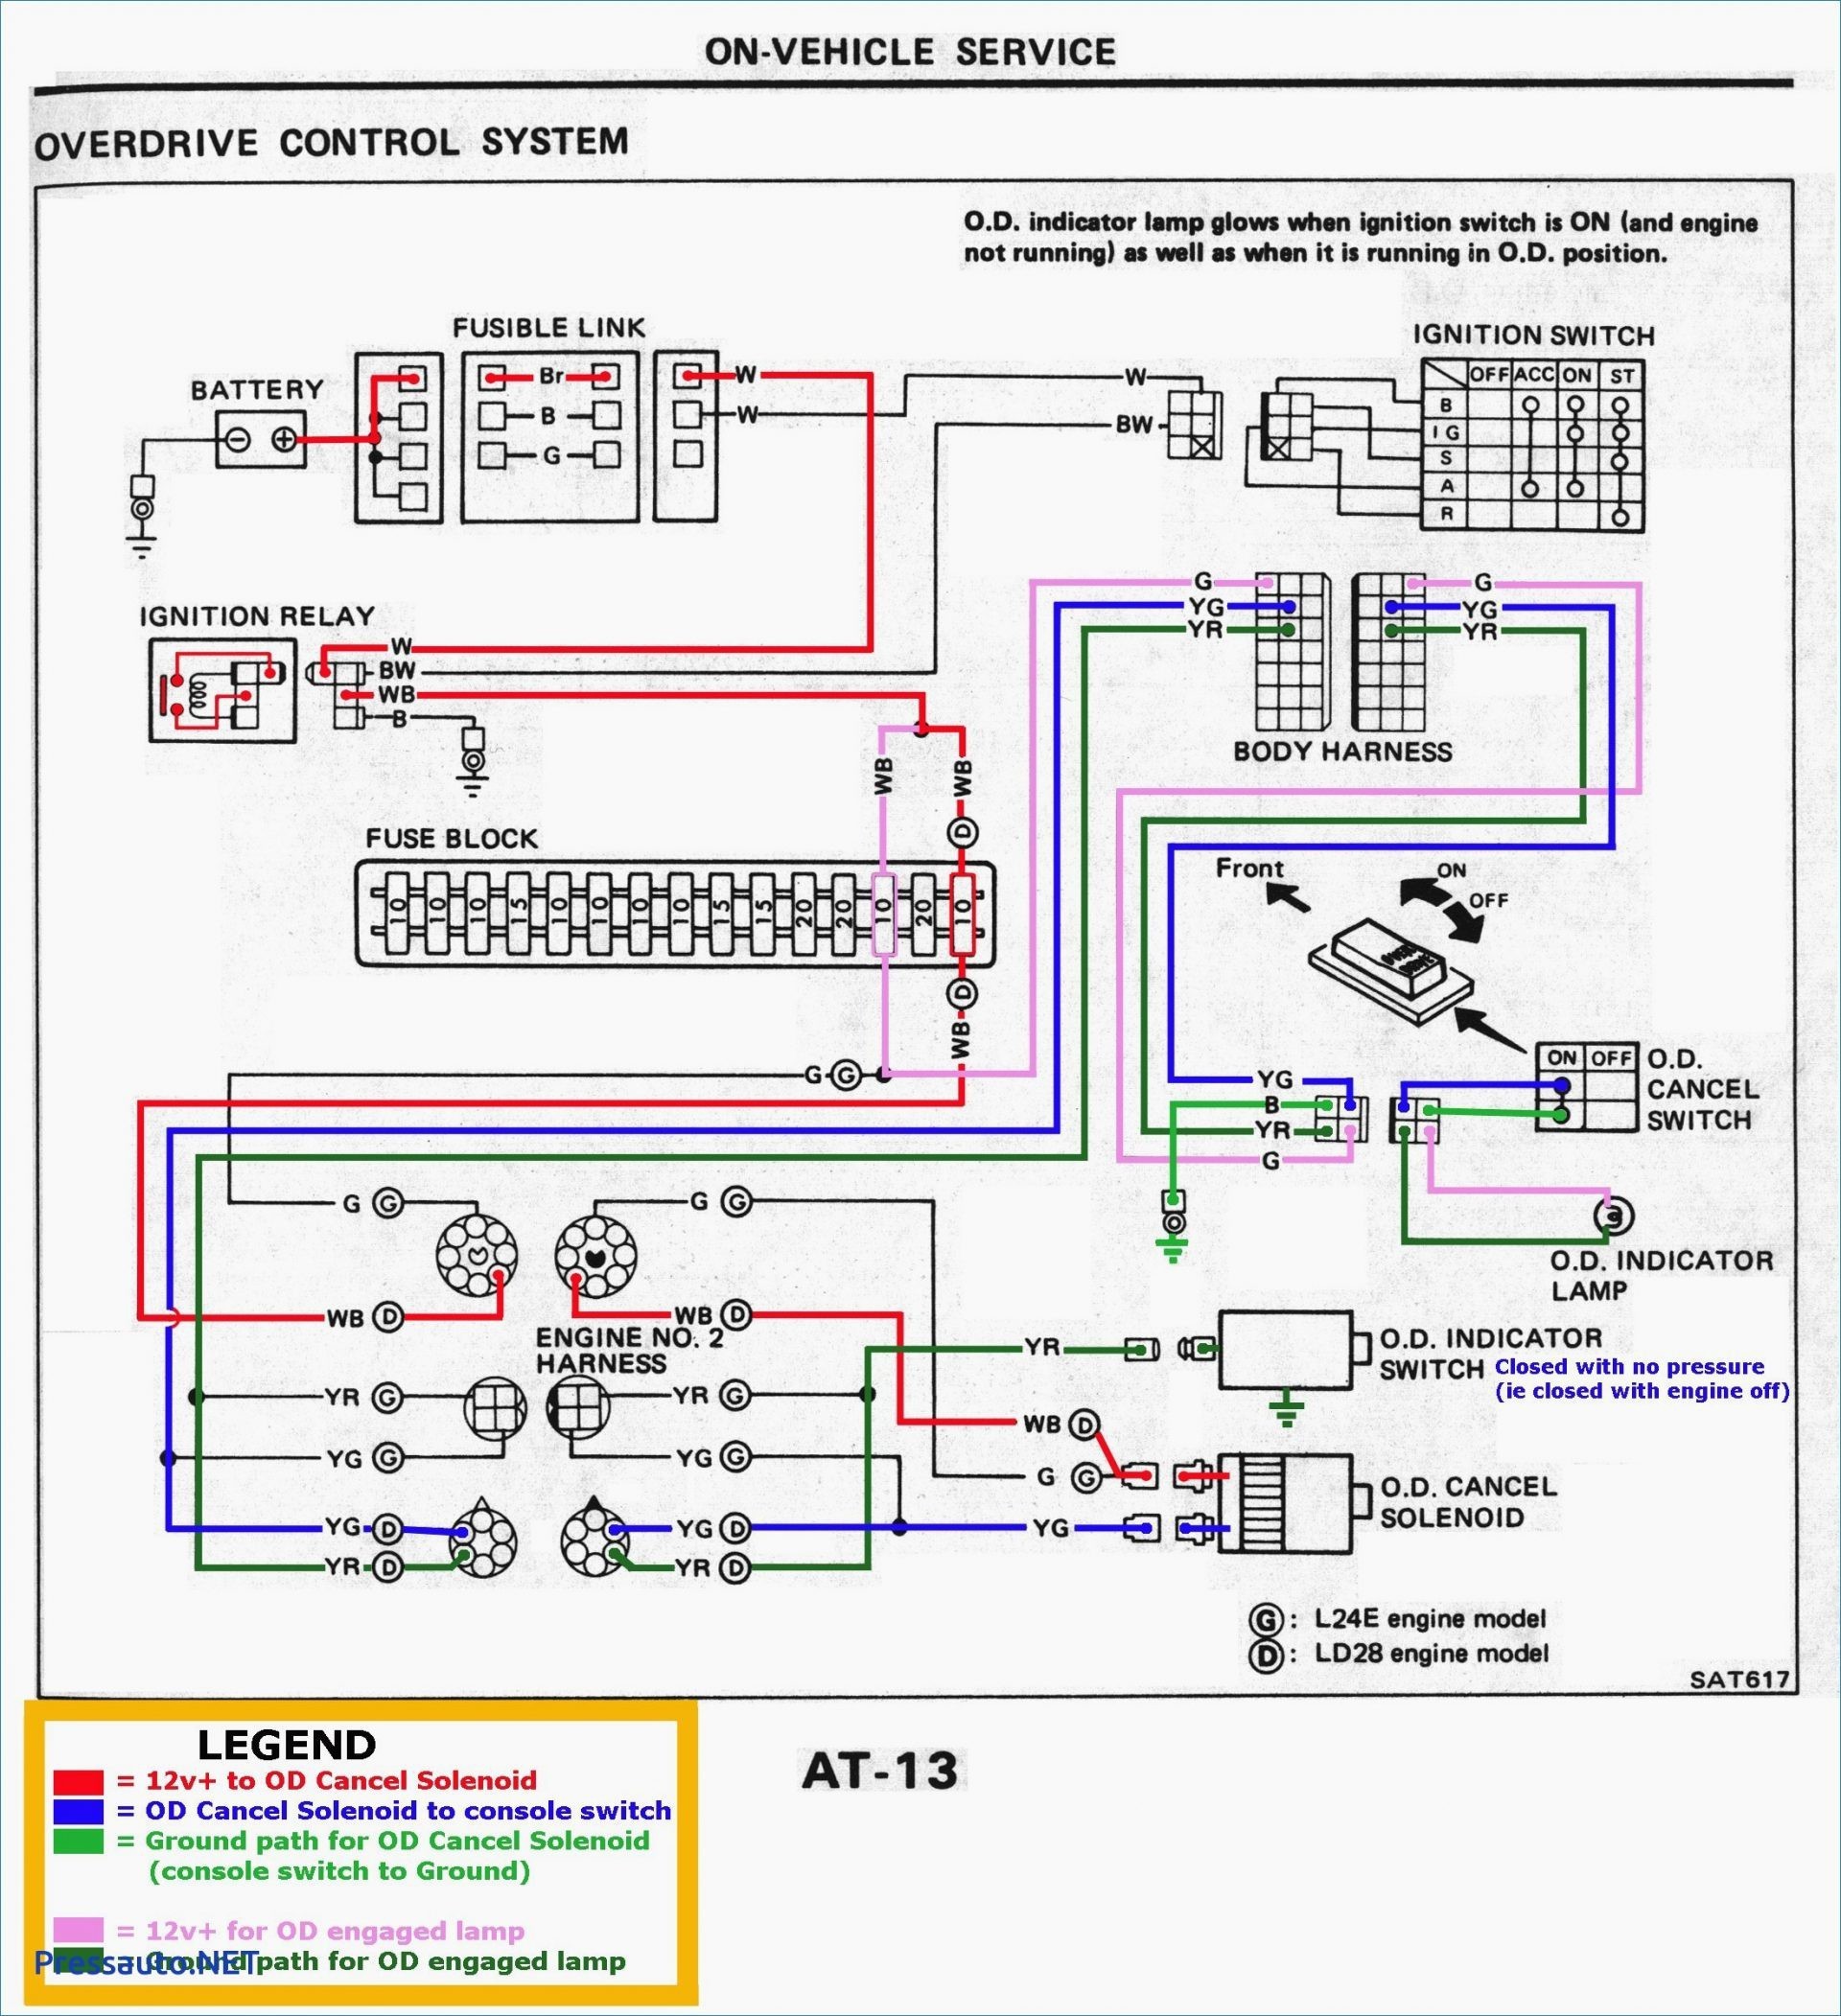 Wiring Diagram For 1995 Ford F150 from mainetreasurechest.com